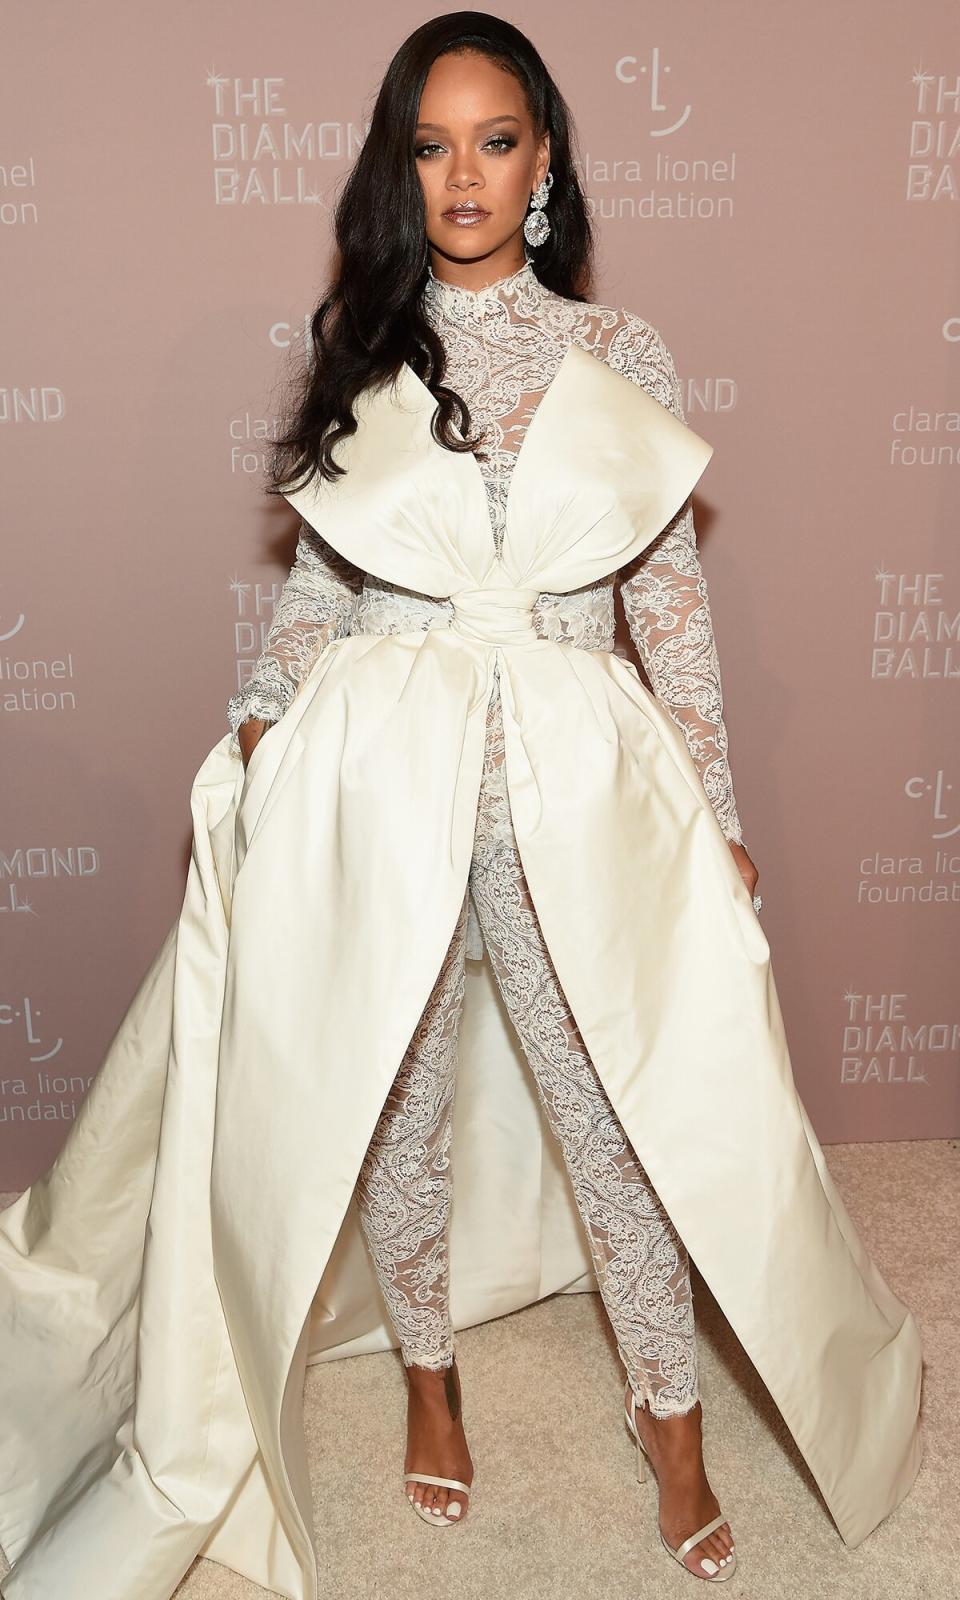 Rihanna attends Rihanna's 4th Annual Diamond Ball benefitting The Clara Lionel Foundation at Cipriani Wall Street on September 13, 2018 in New York City